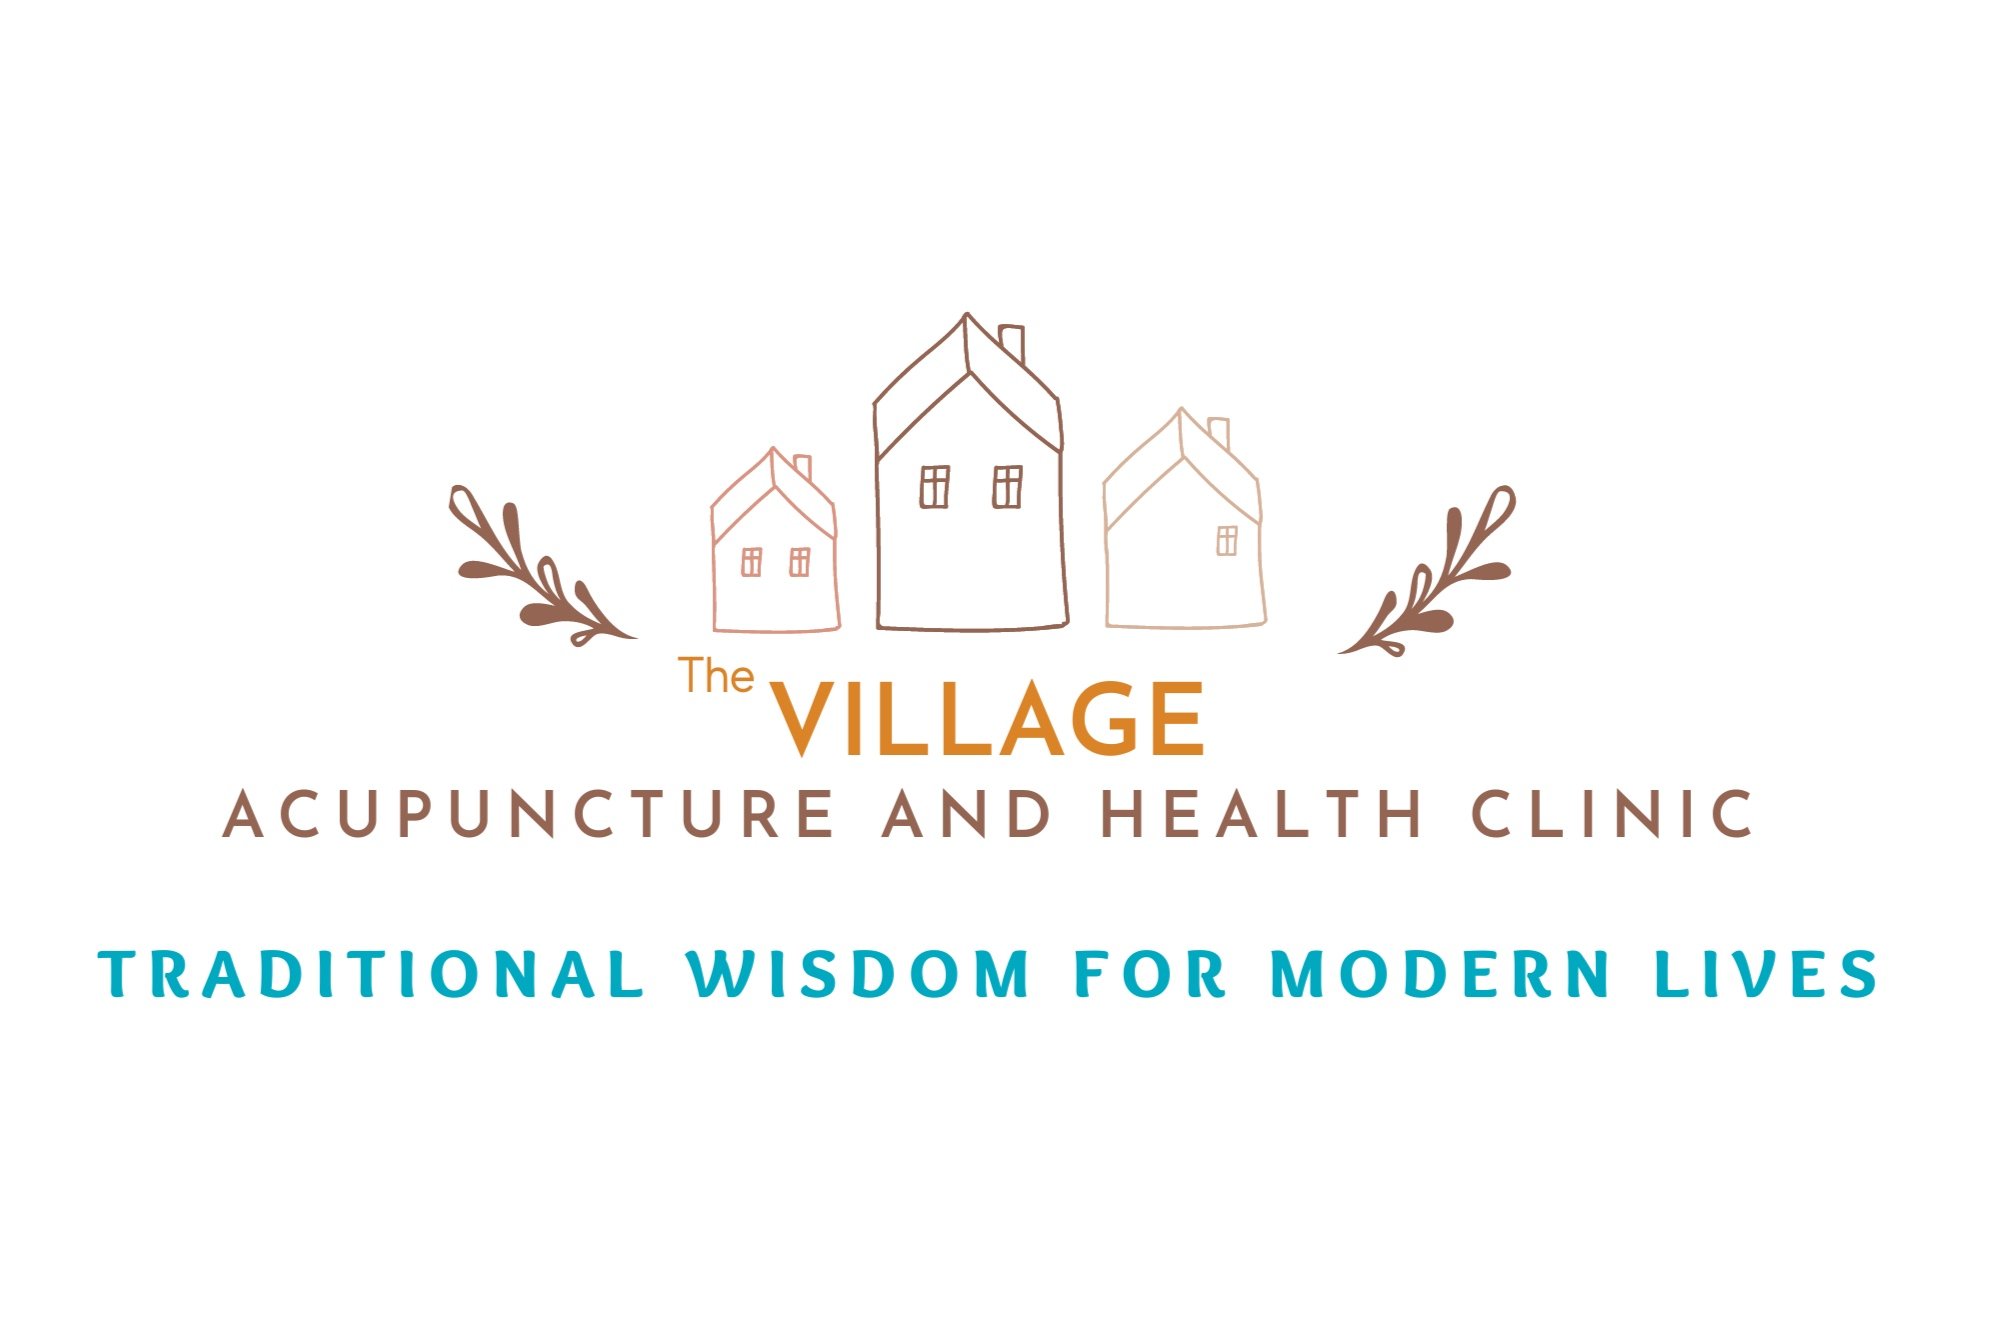 The Village Acupuncture & Health Clinic